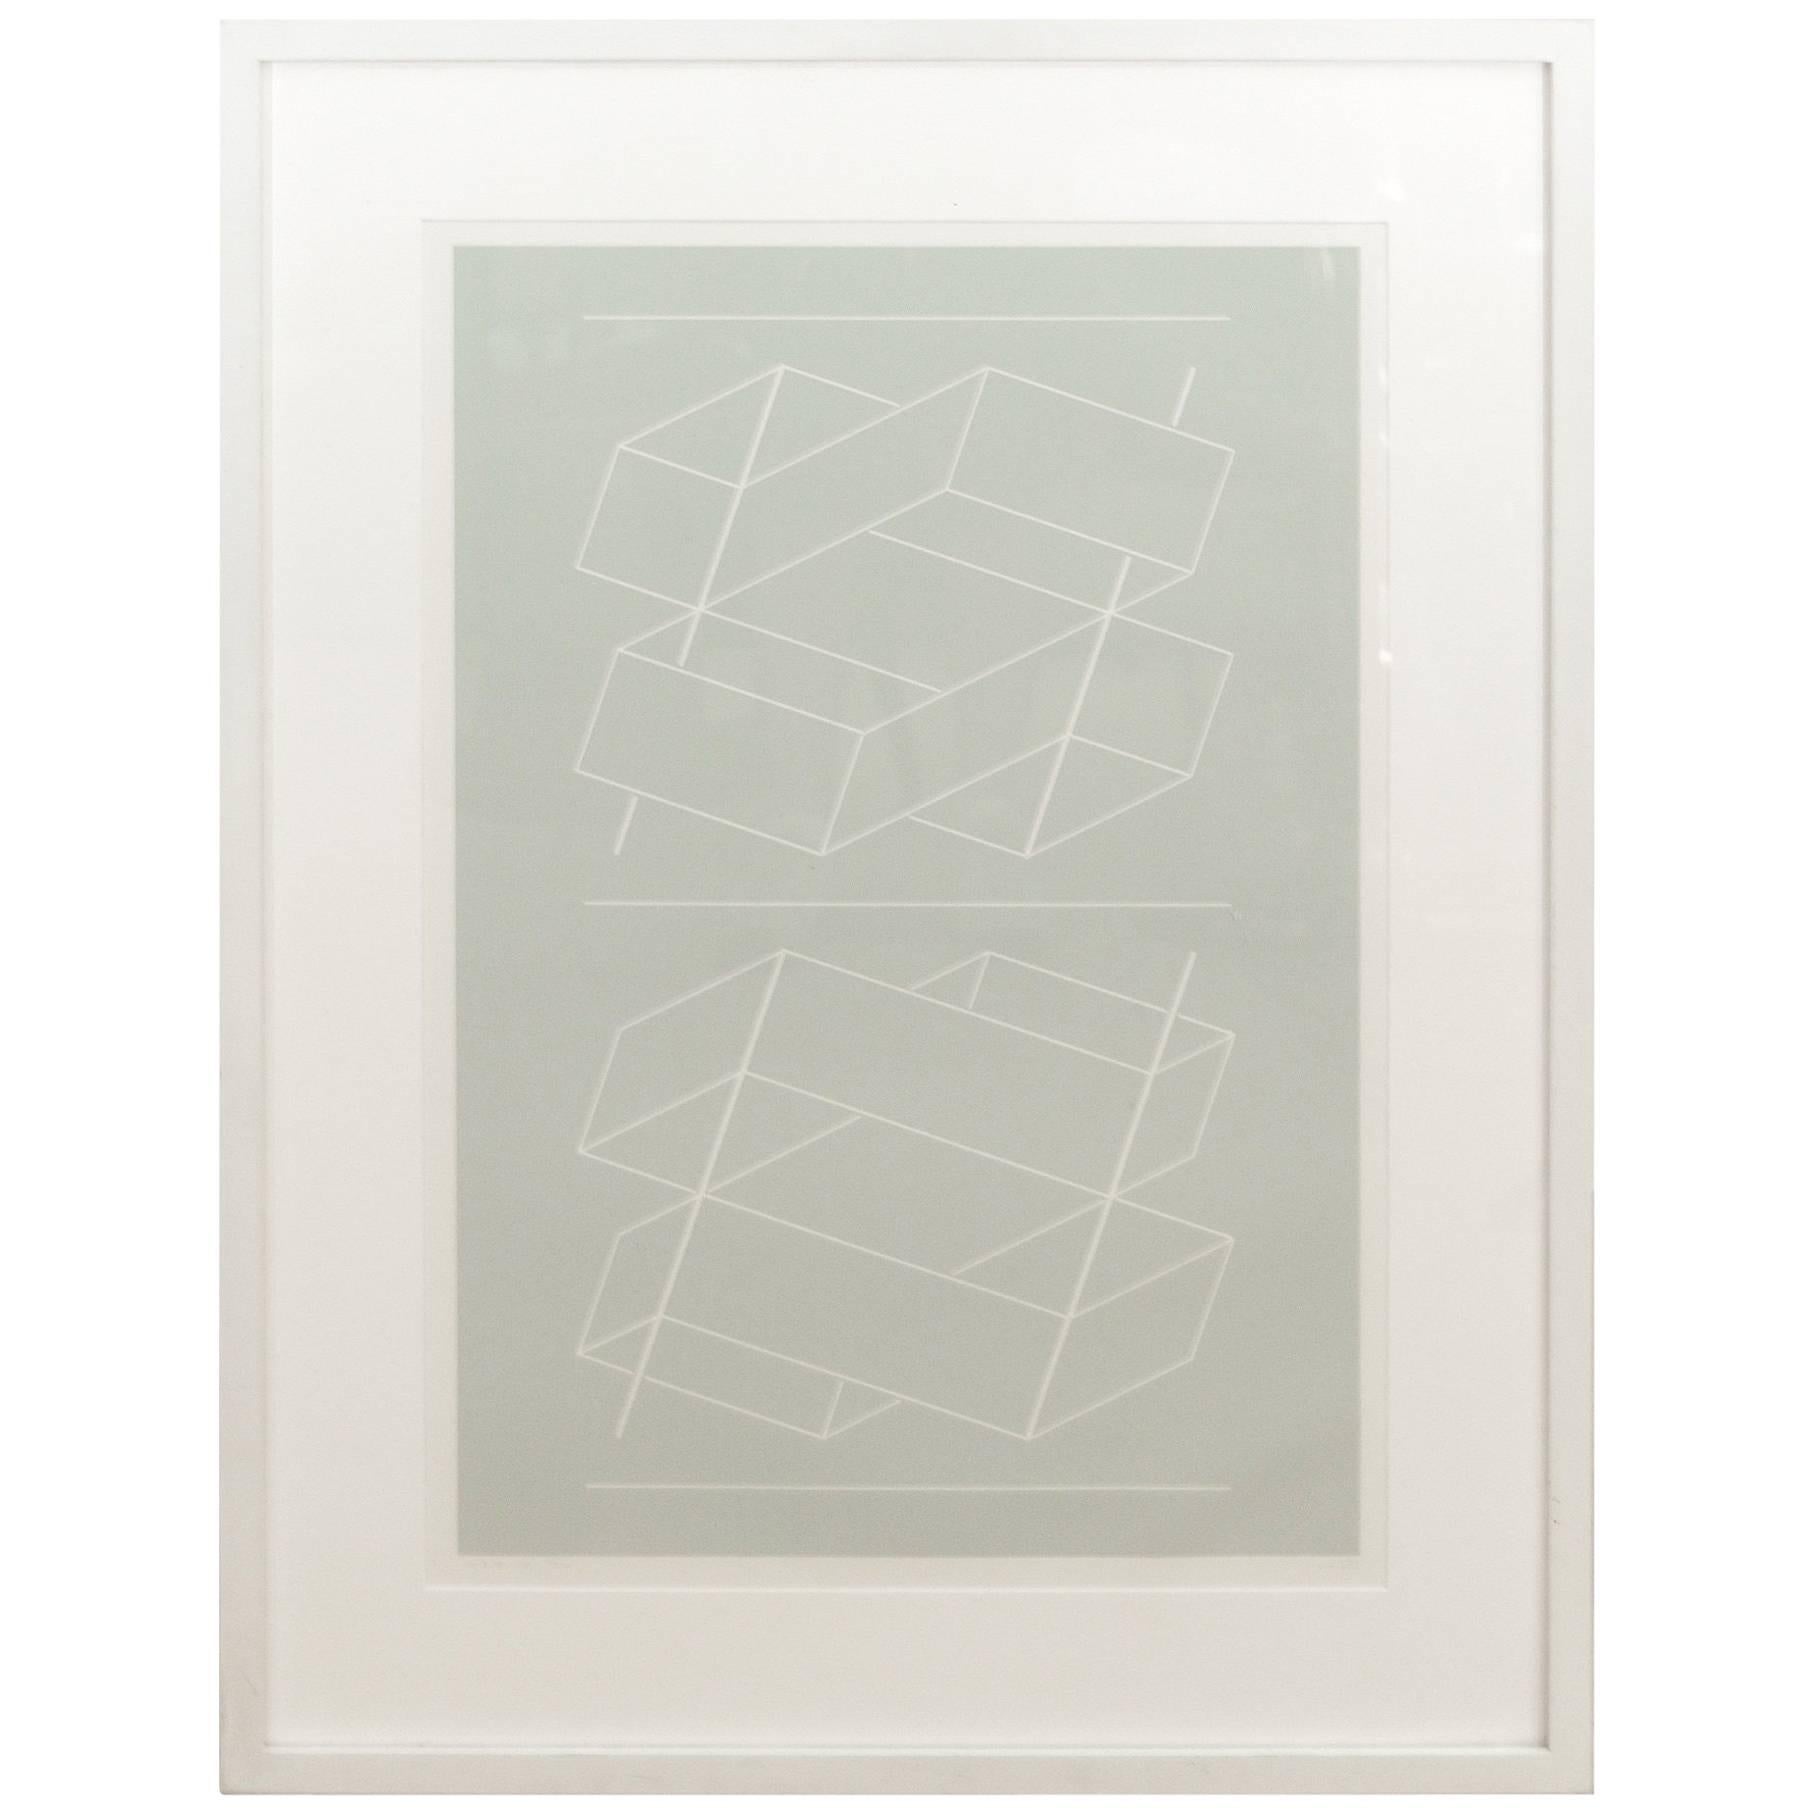 "White Embossing on Gray IV" by Josef Albers, 1971